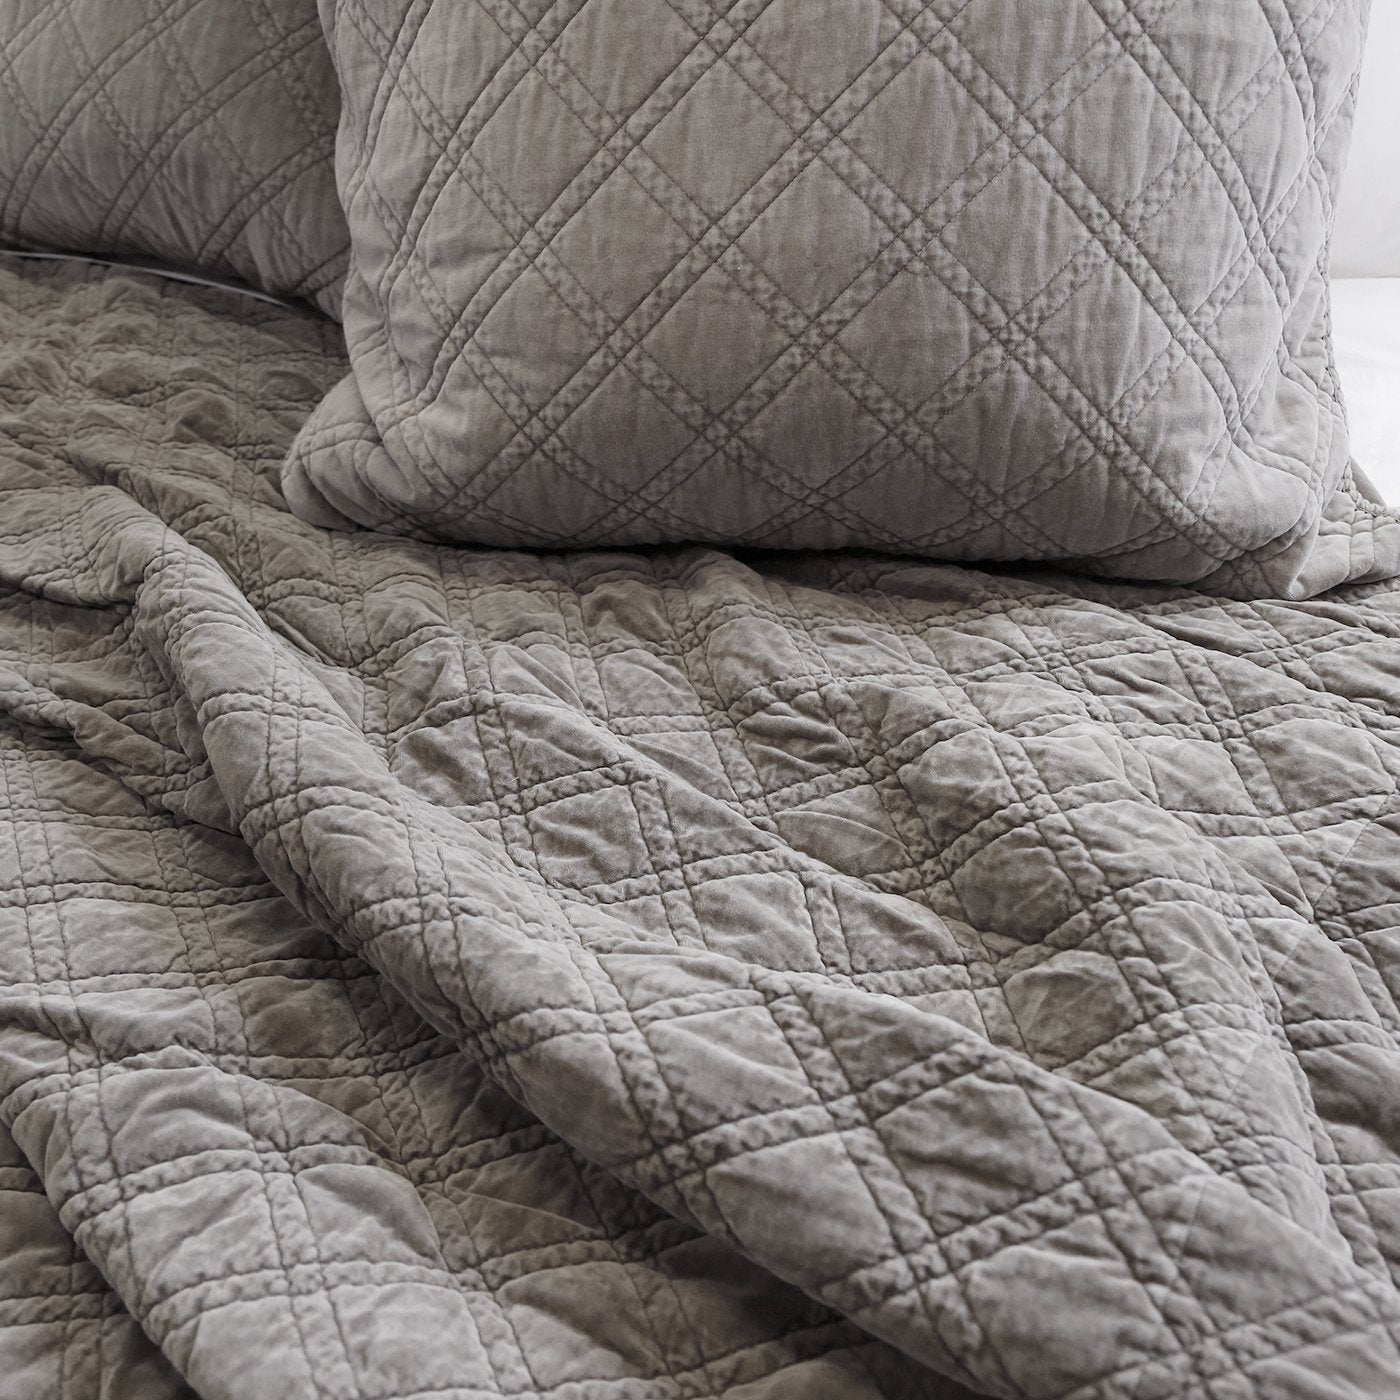 POM POM BRUSSELS COVERLET COLLECTION - PEWTER